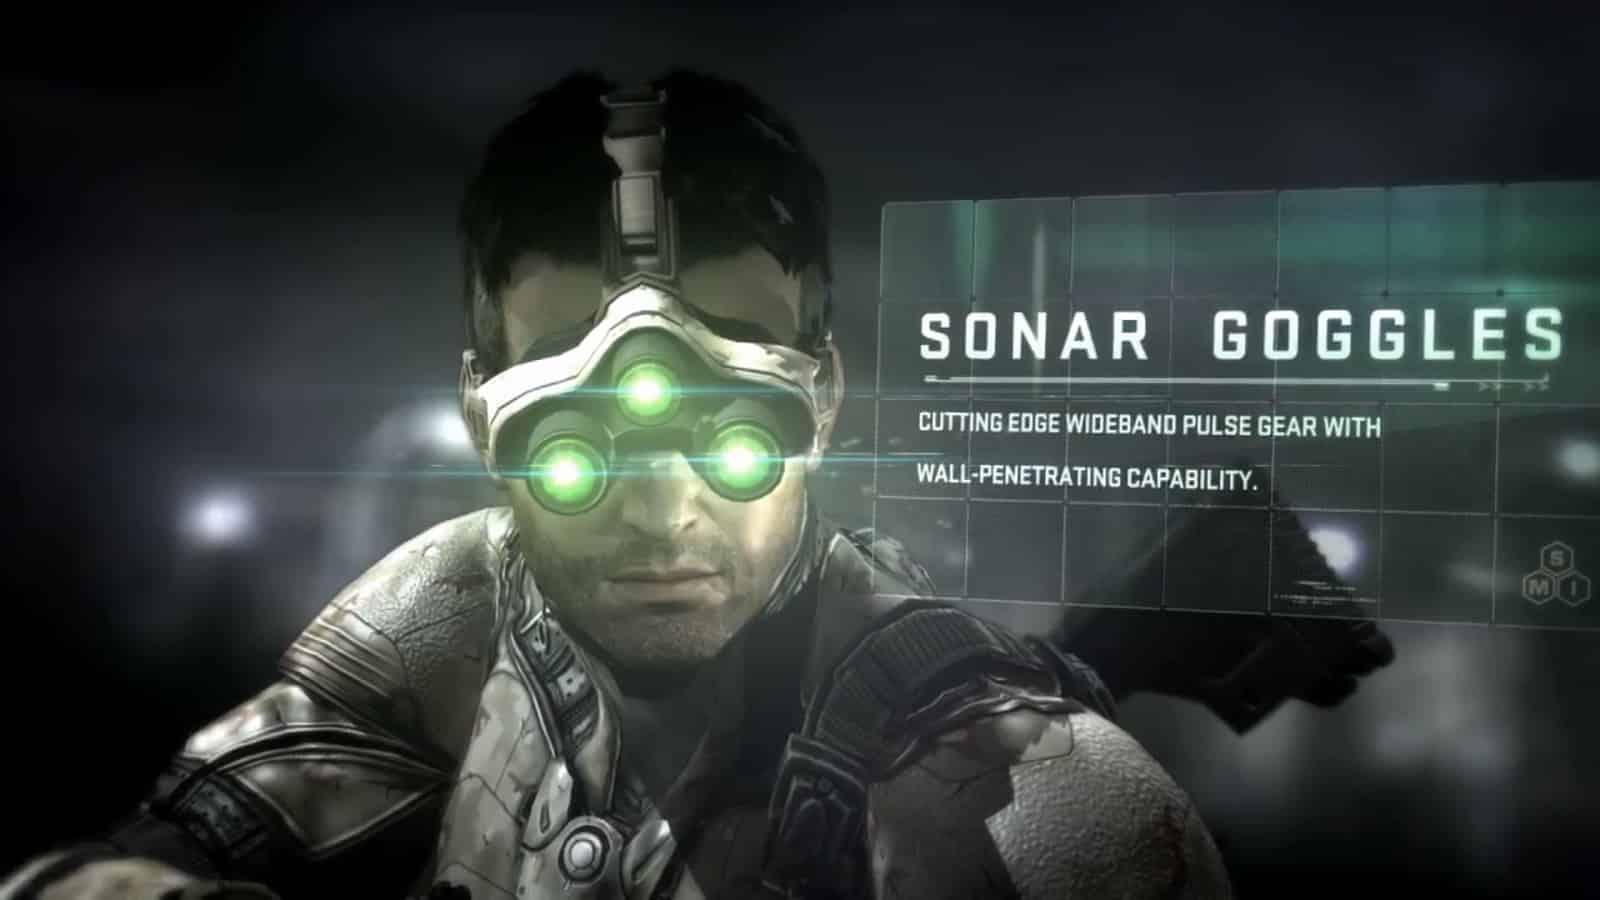 Sam Fisher's Sonar Goggles are an iconic part of the Splinter Cell franchise